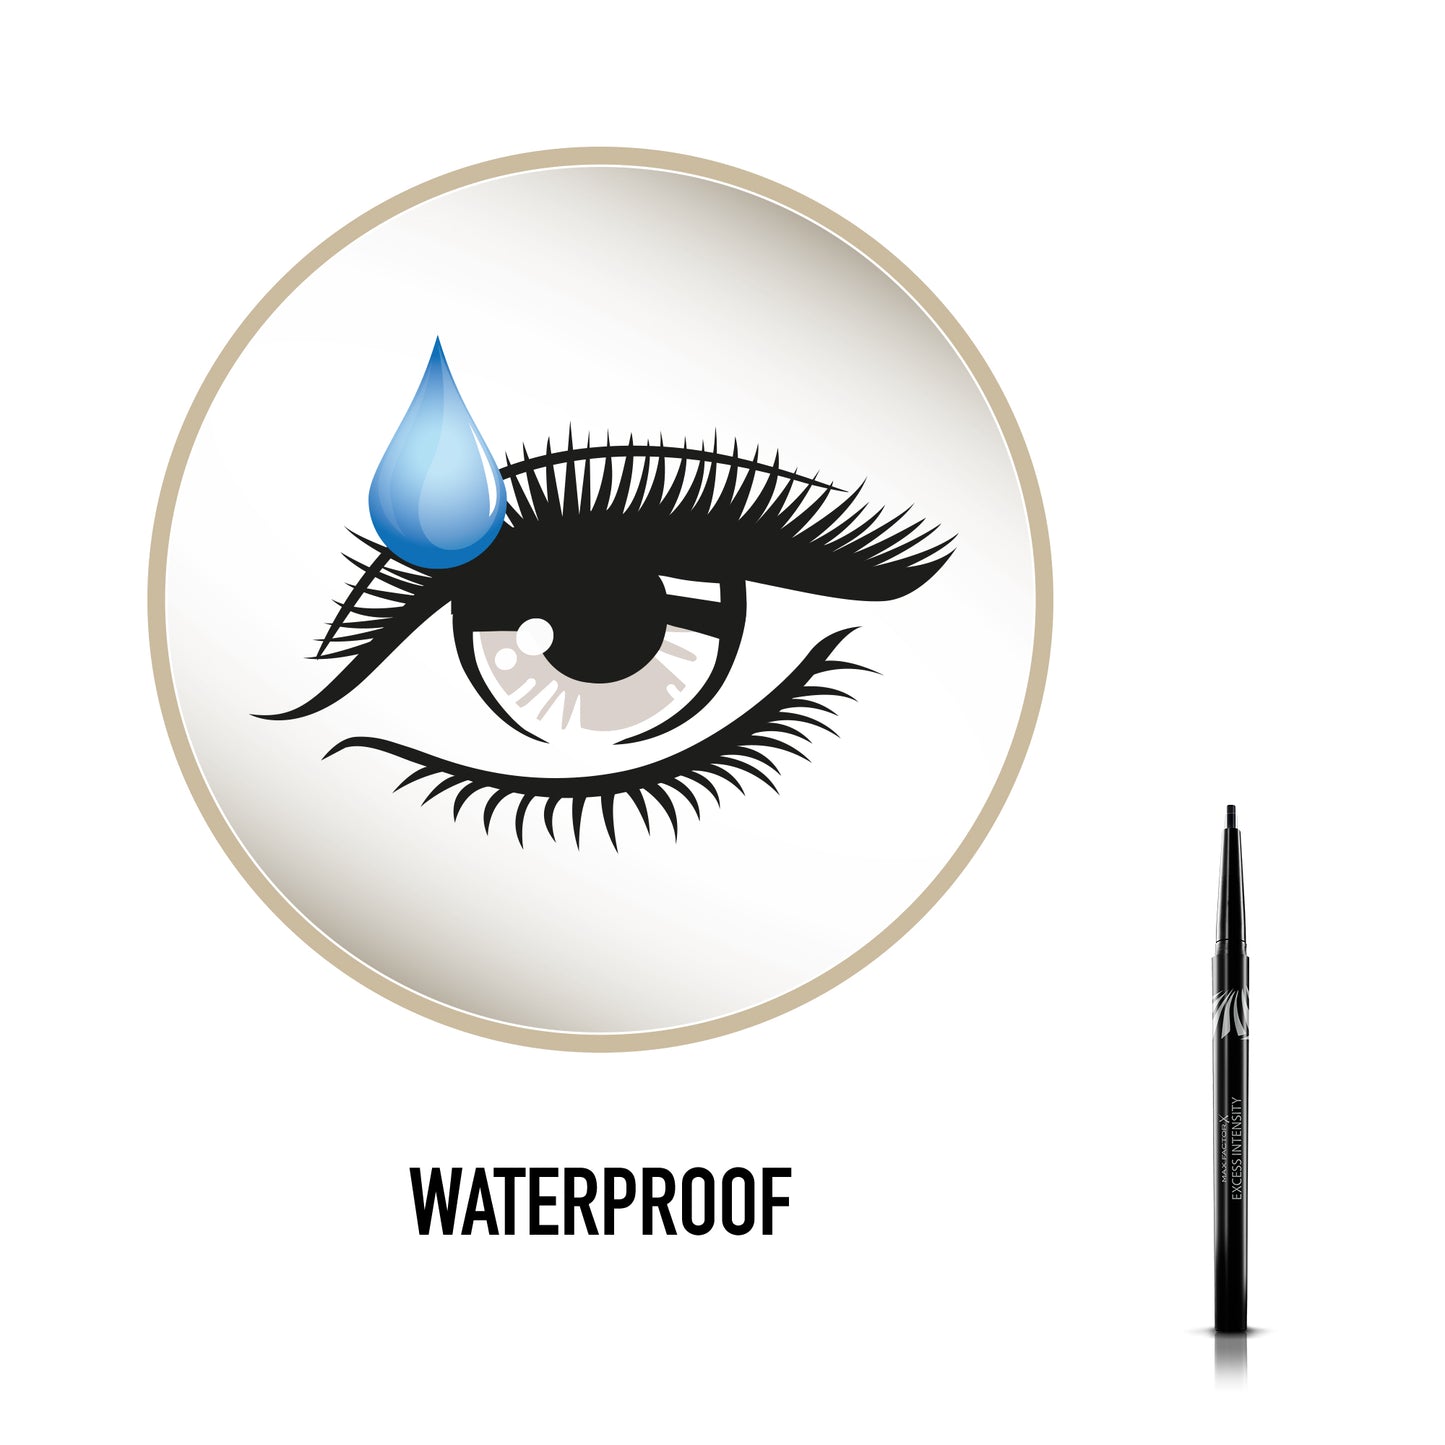 Max Factor - Matita Occhi Automatica Excess Intensity Longwear, Eyeliner Waterproof Tratto Preciso, 04 Charcoal, 2 g